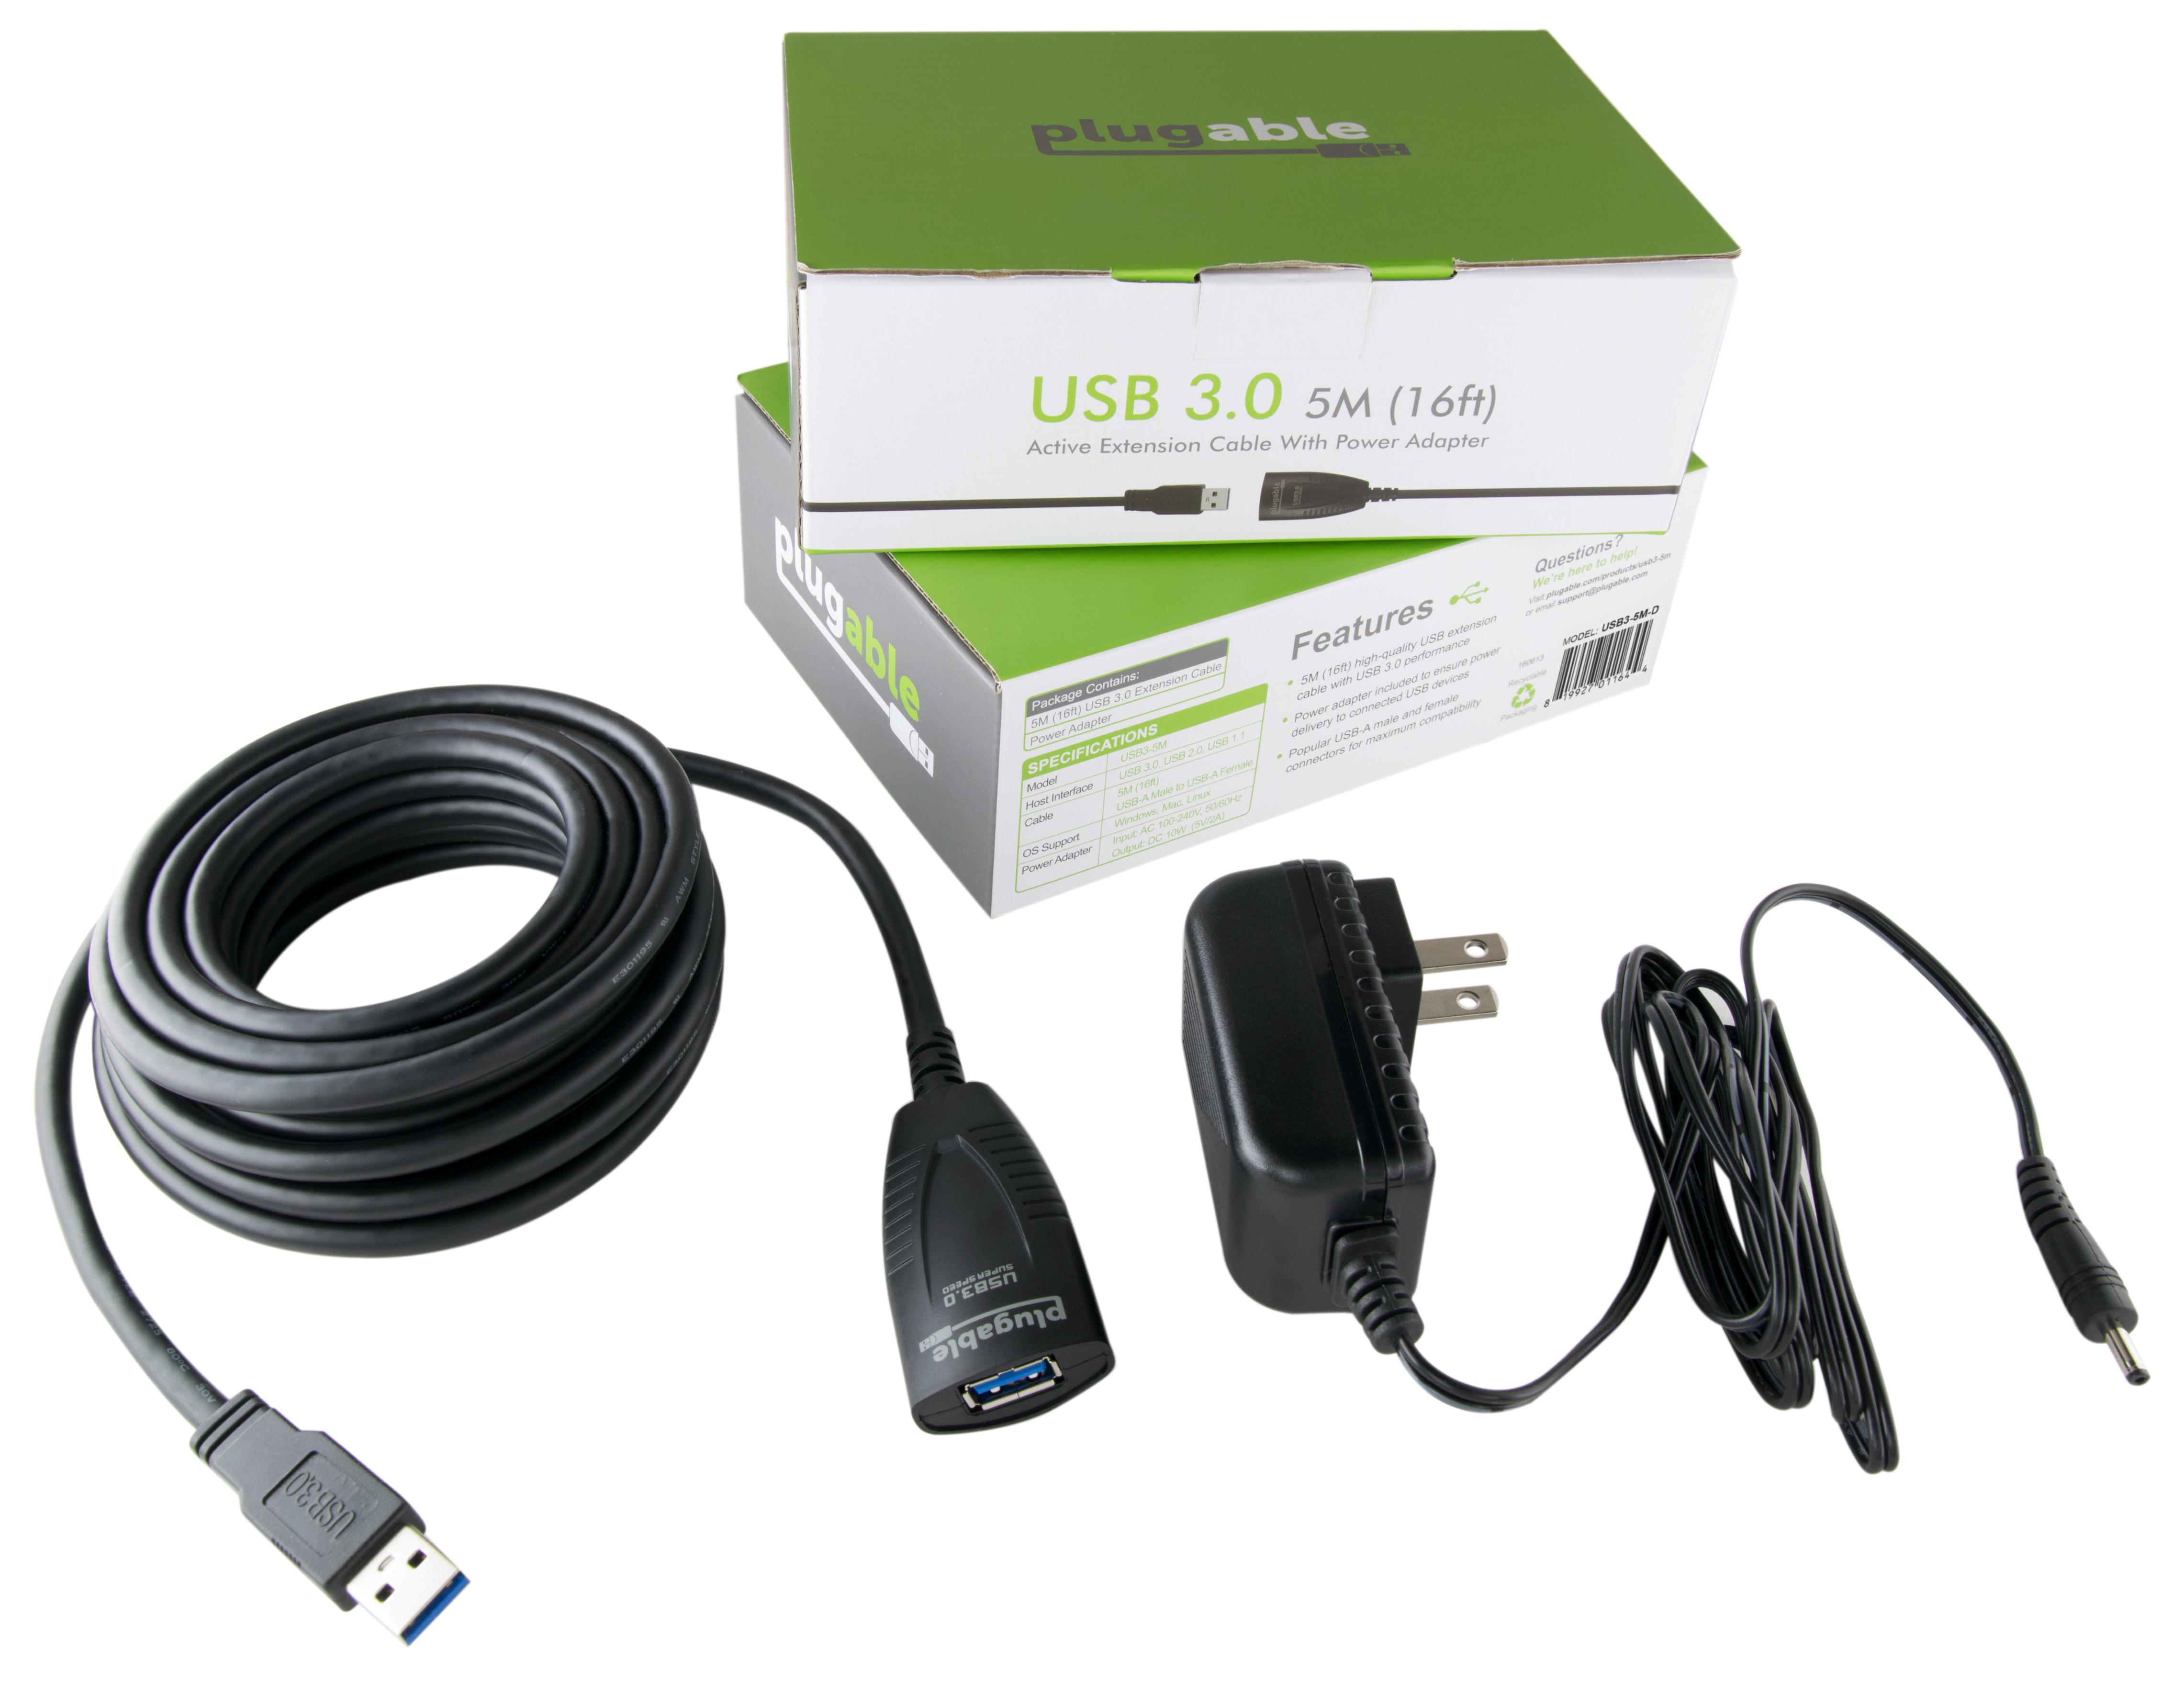 Plugable 5 Meter (16 Foot) USB 3.0 Active Extension Cable with AC Power Adapter and Back-Voltage Protection - image 4 of 6